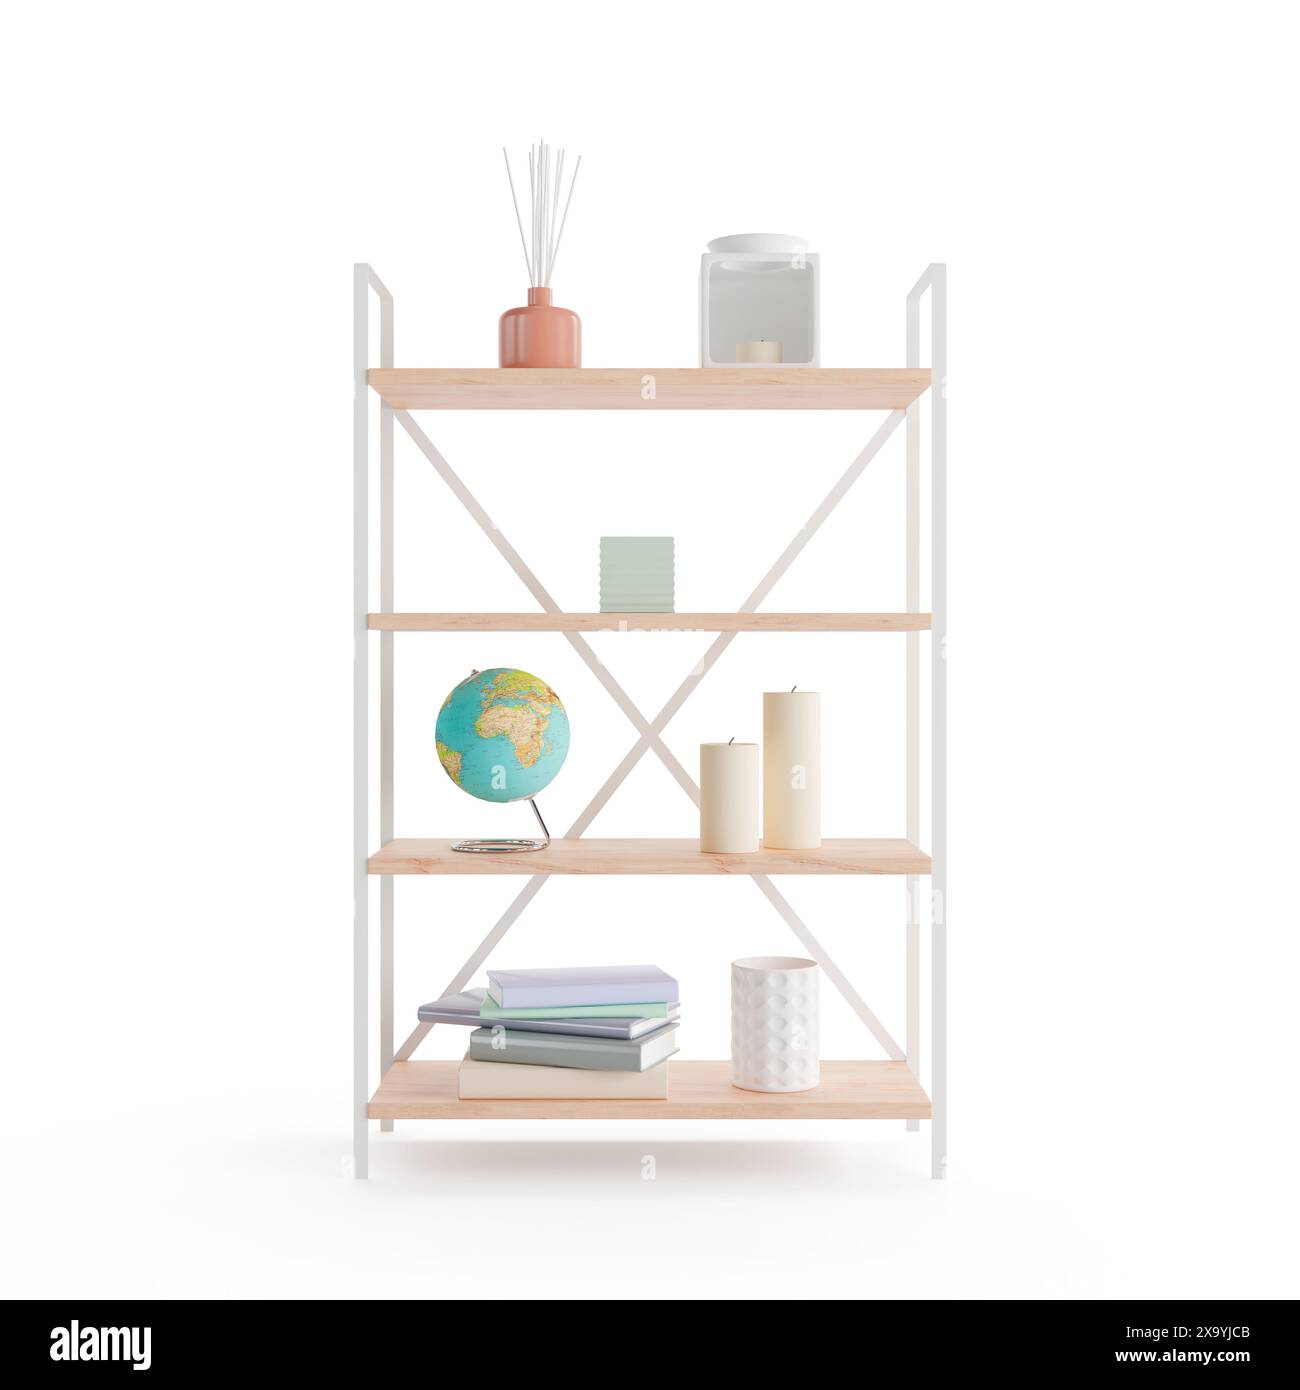 A 3D illustration of modern shelves on a white background Stock Photo